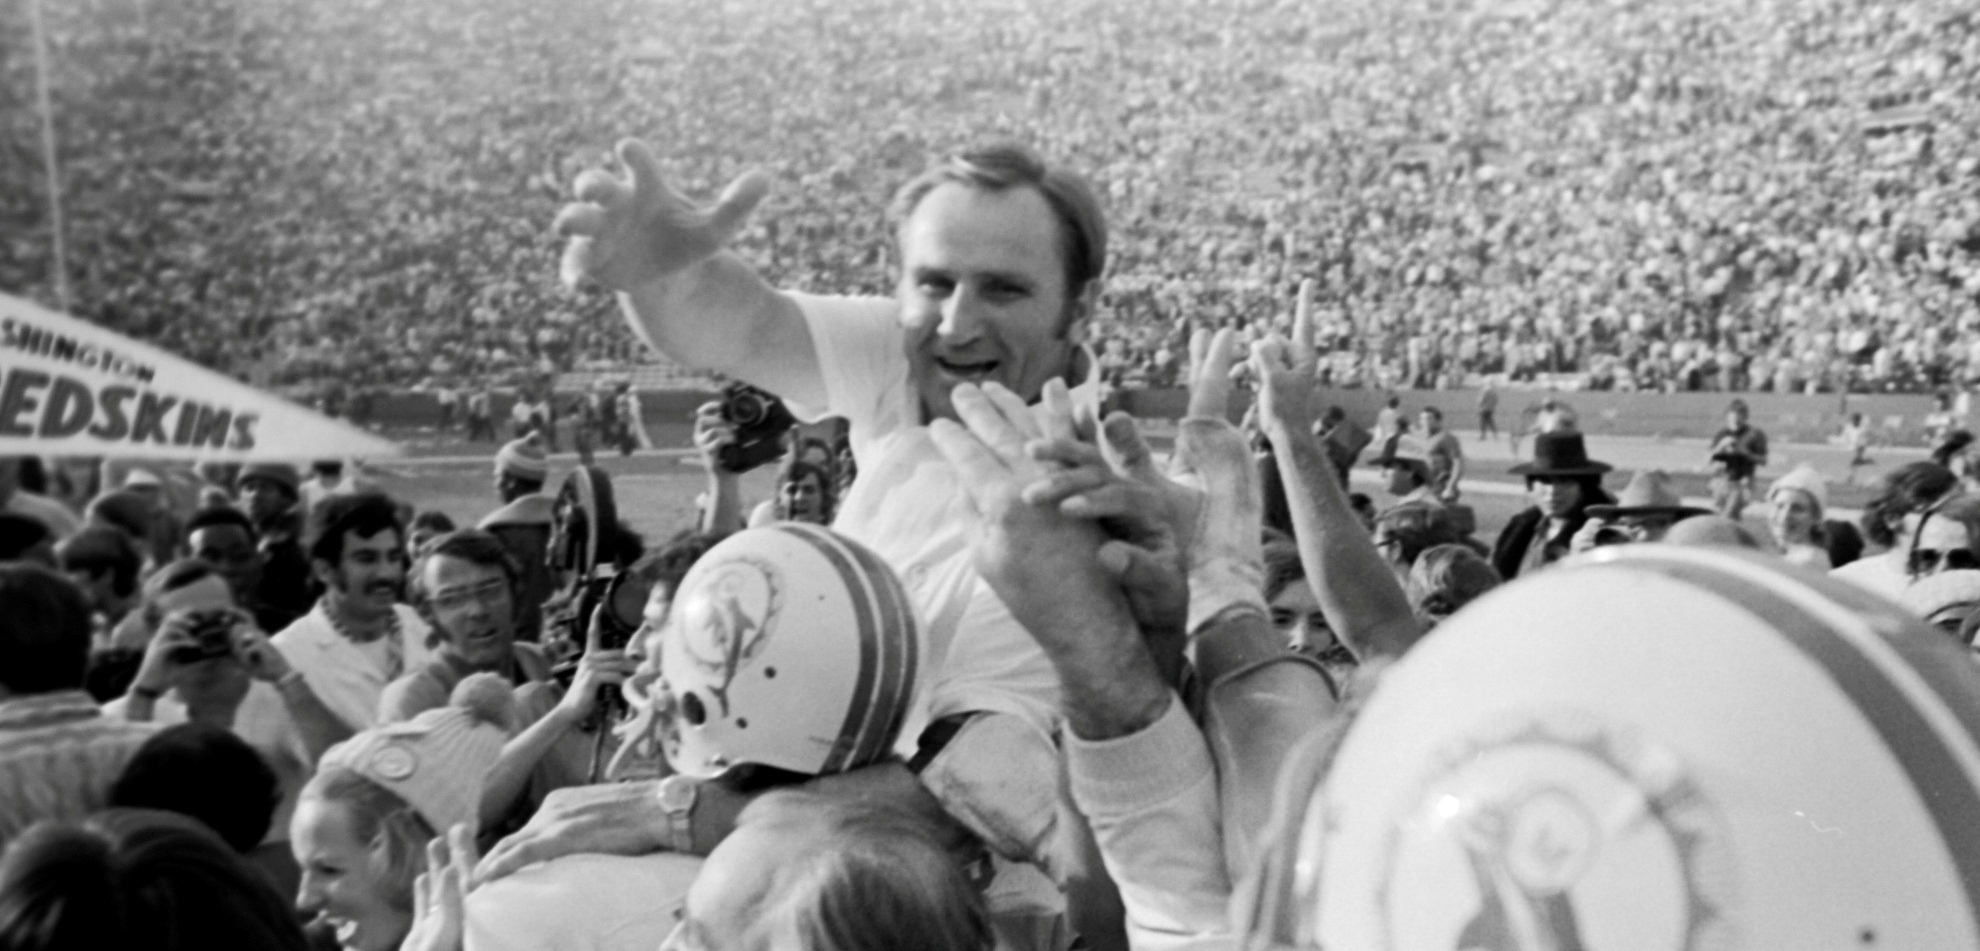 The Miami Dolphins Perfect Season: Undefeated For 50 Years